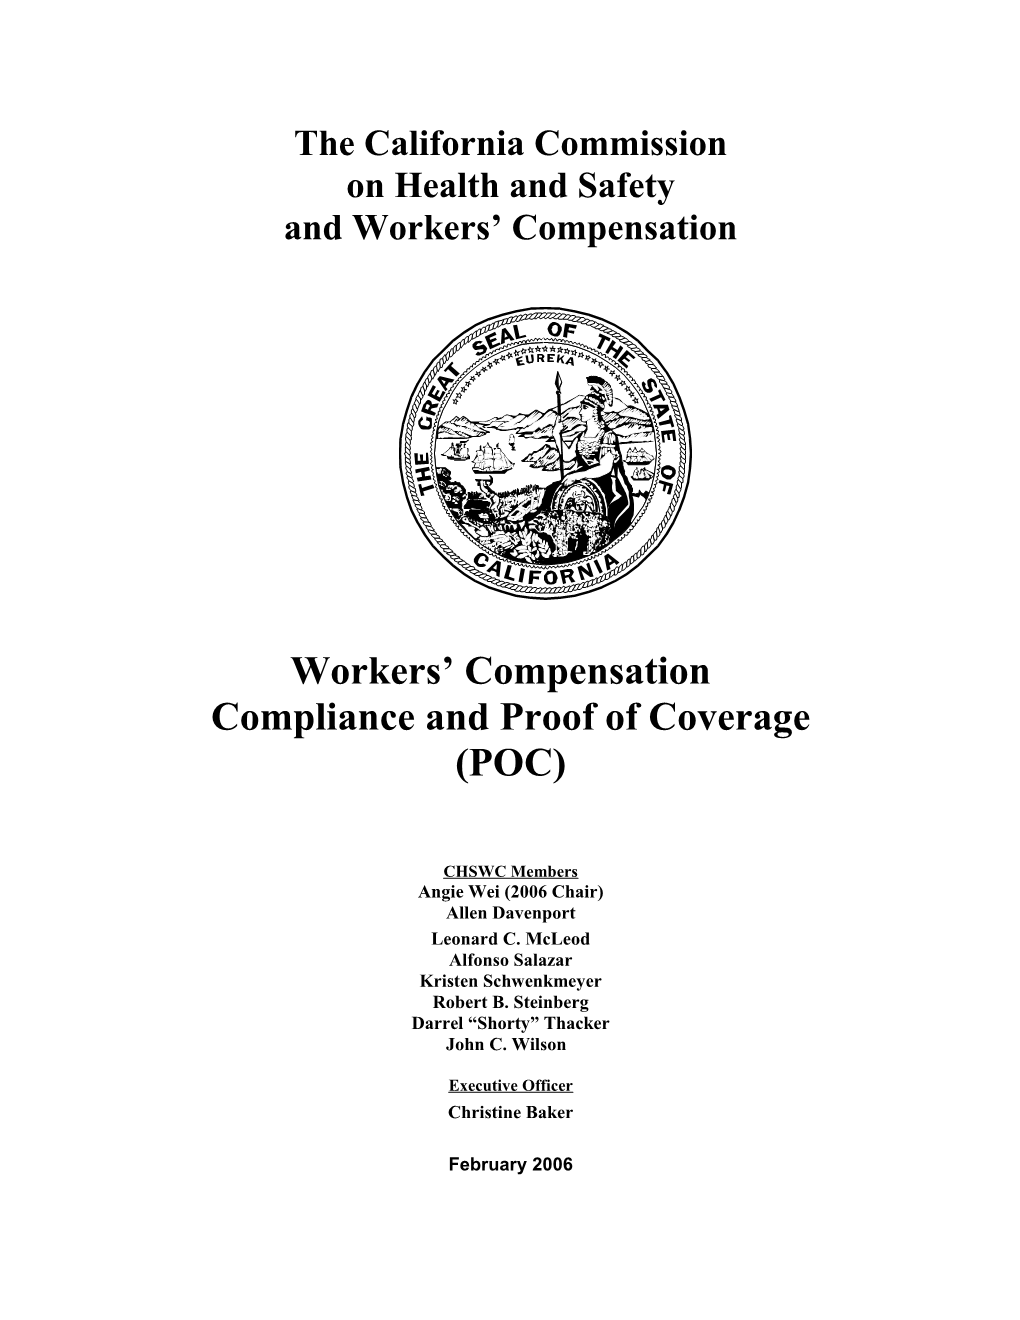 Commission on Health and Safety and Workers Compensation